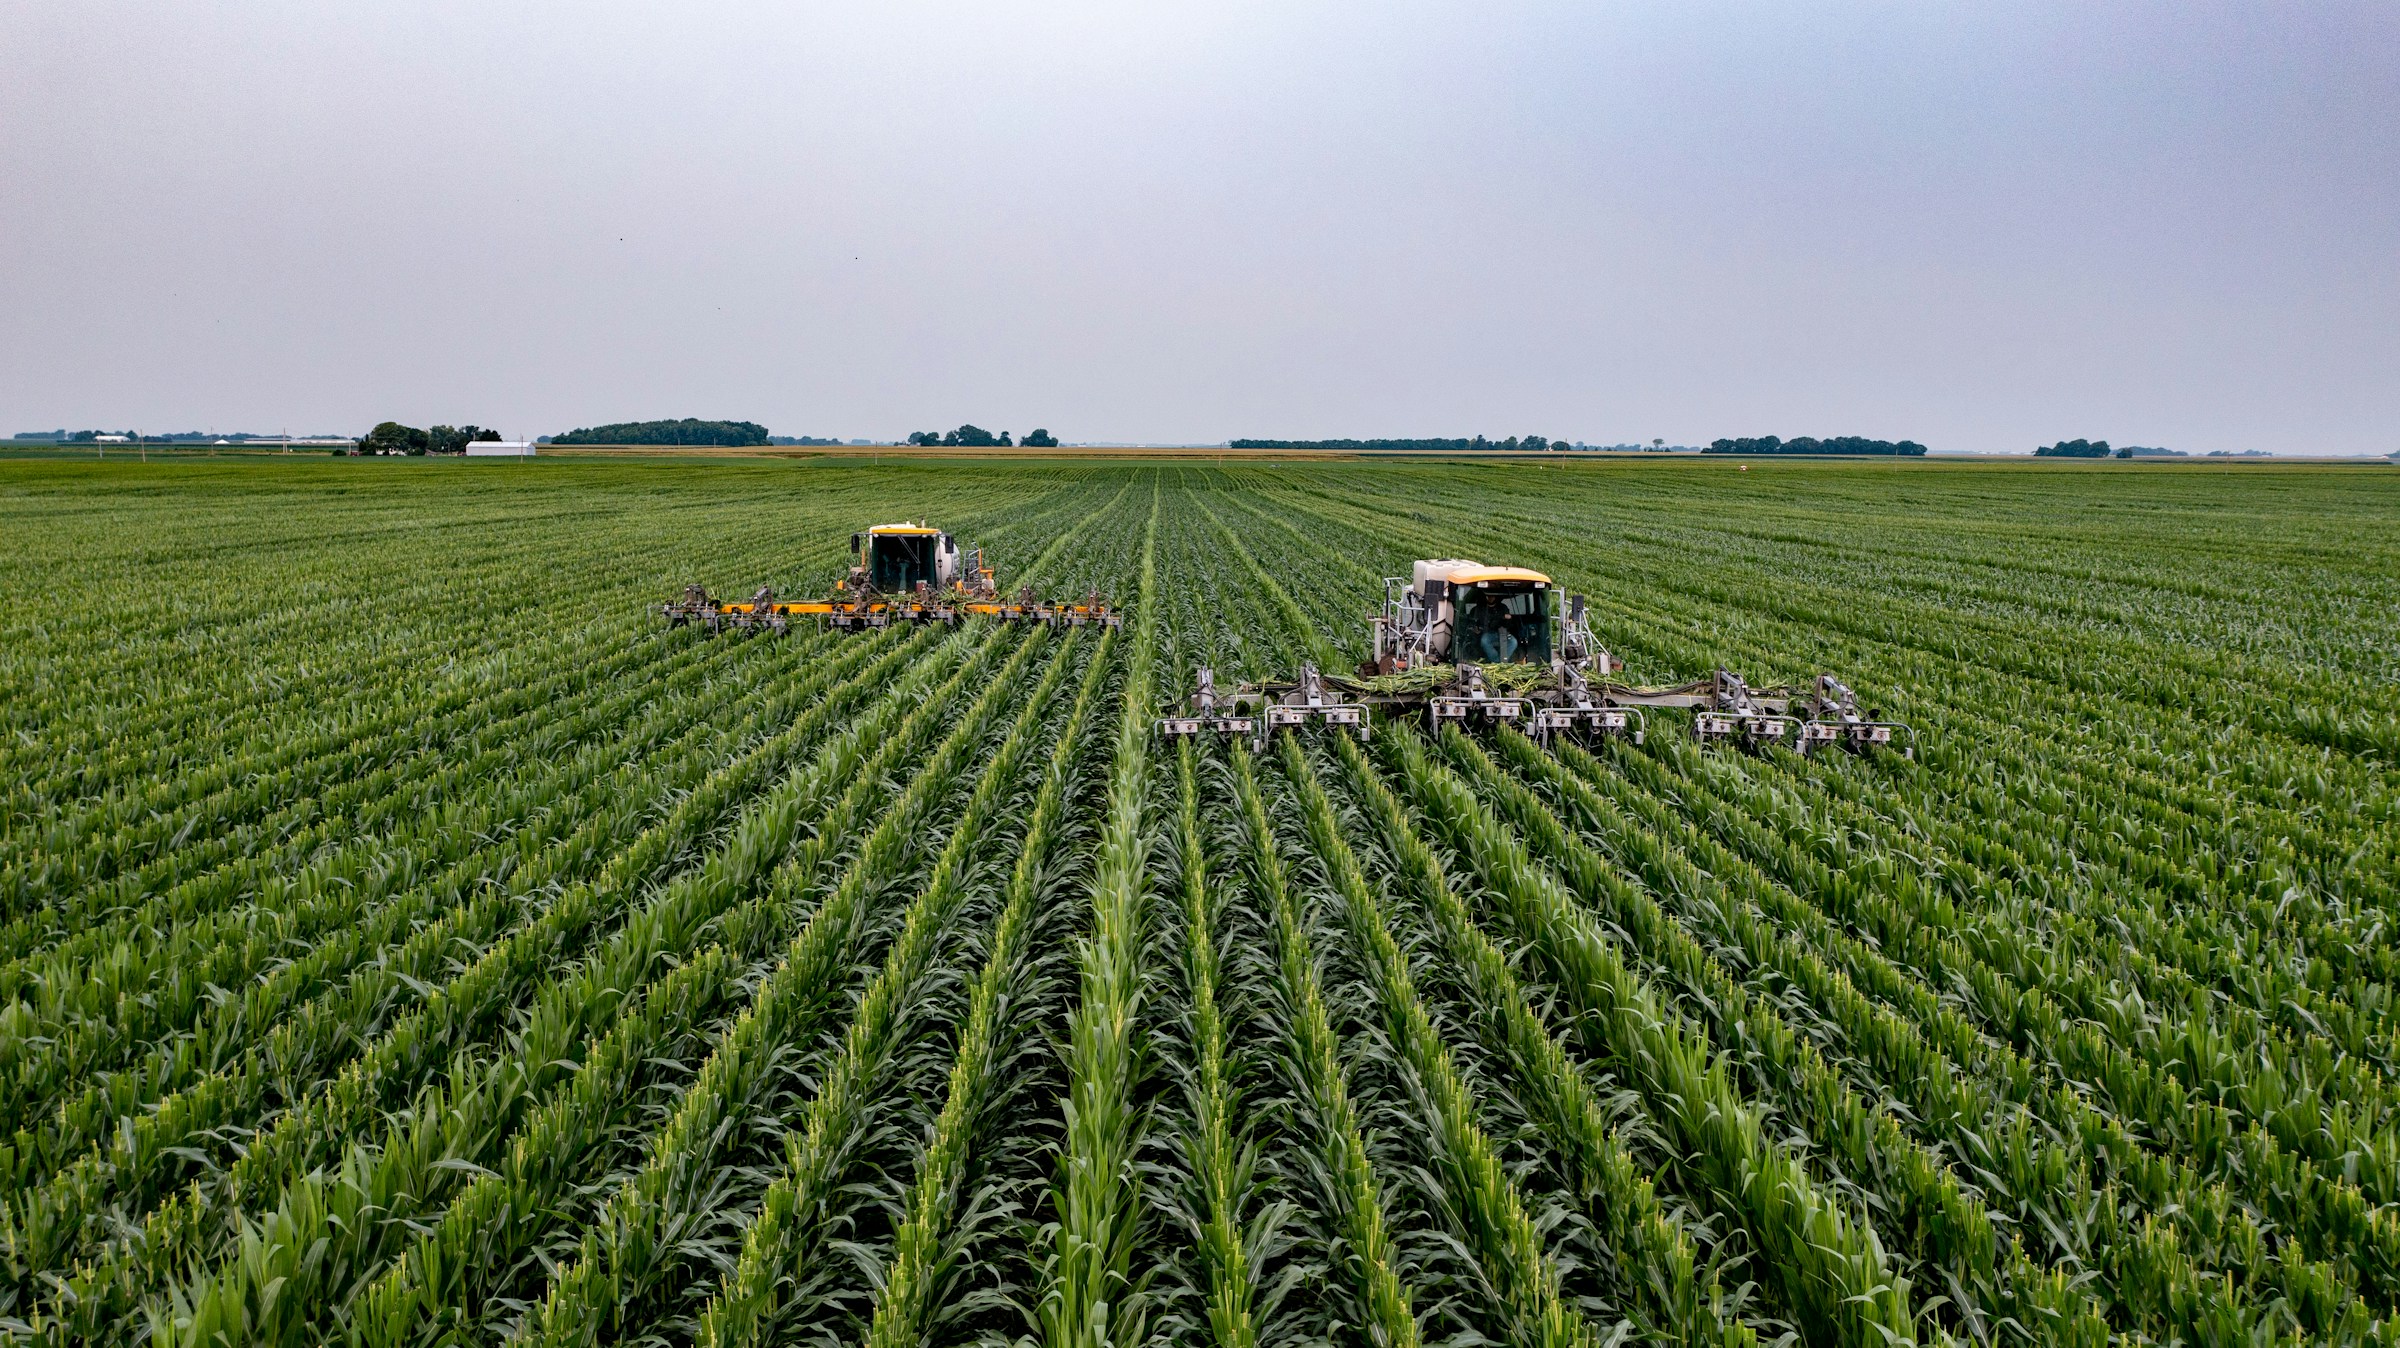 Two tractors engaged in E-Agriculture by working in a corn field.